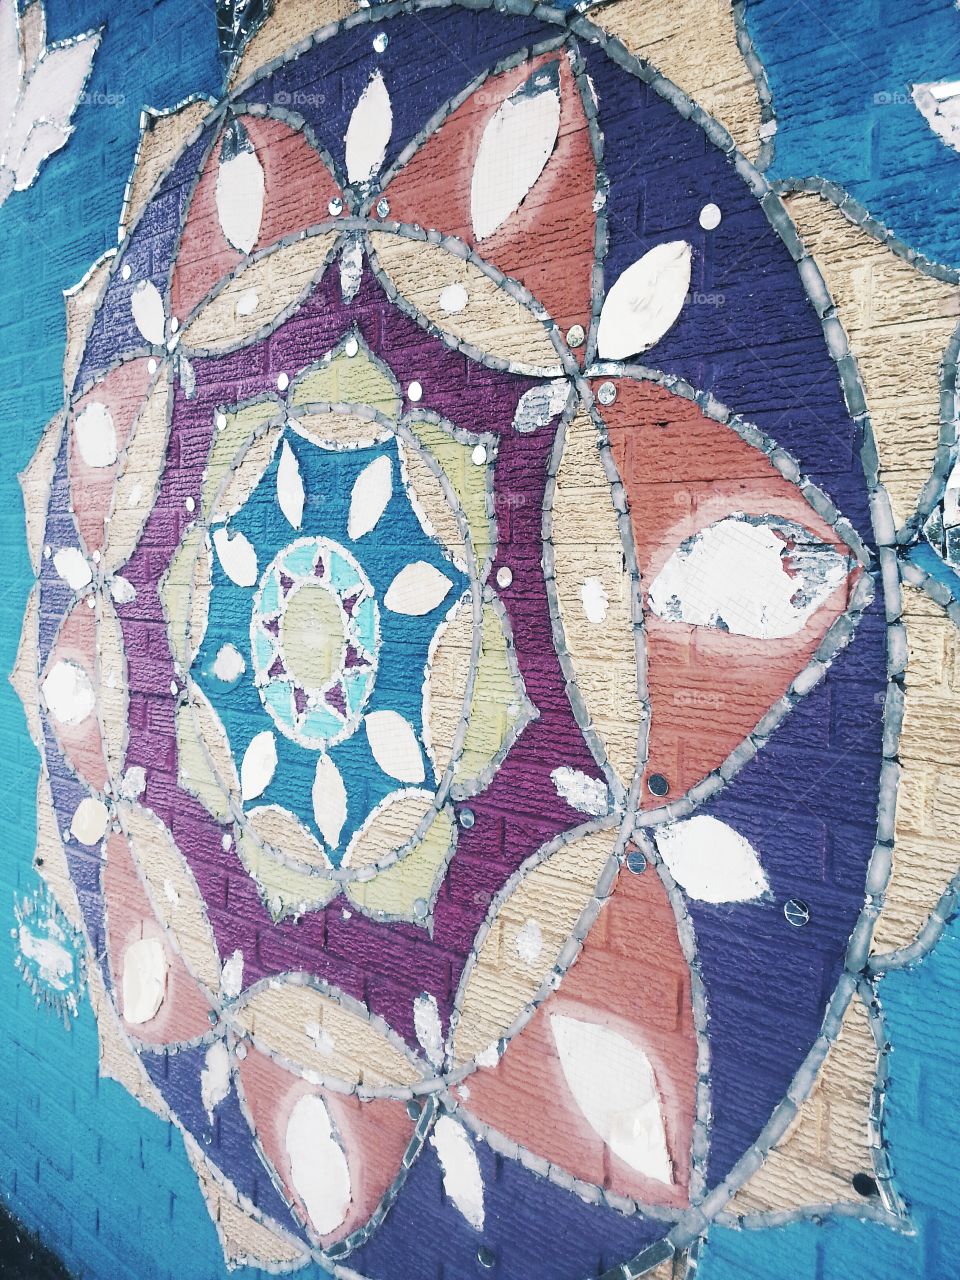 Glass mandala piece made by the community of bywater are new orleans♡